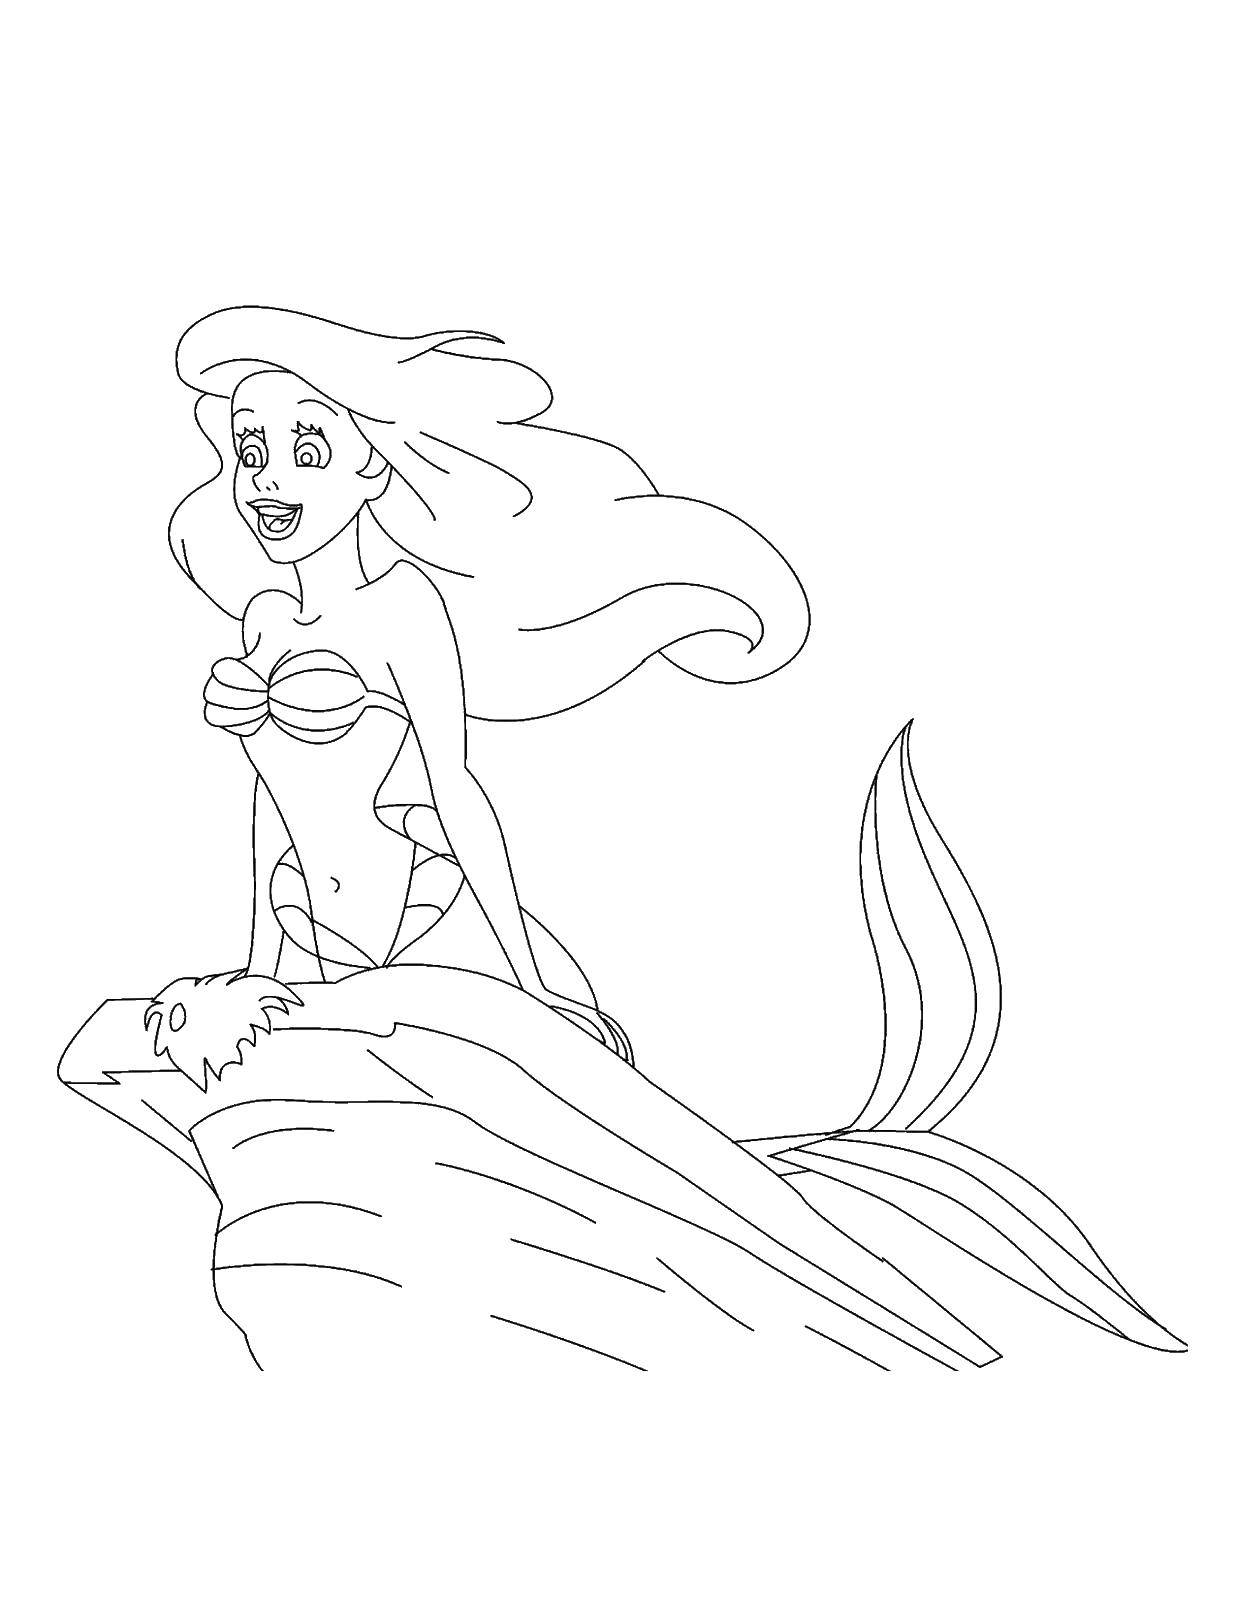 Coloring The little mermaid Ariel. Category the little mermaid Ariel. Tags:  Ariel, mermaid, .